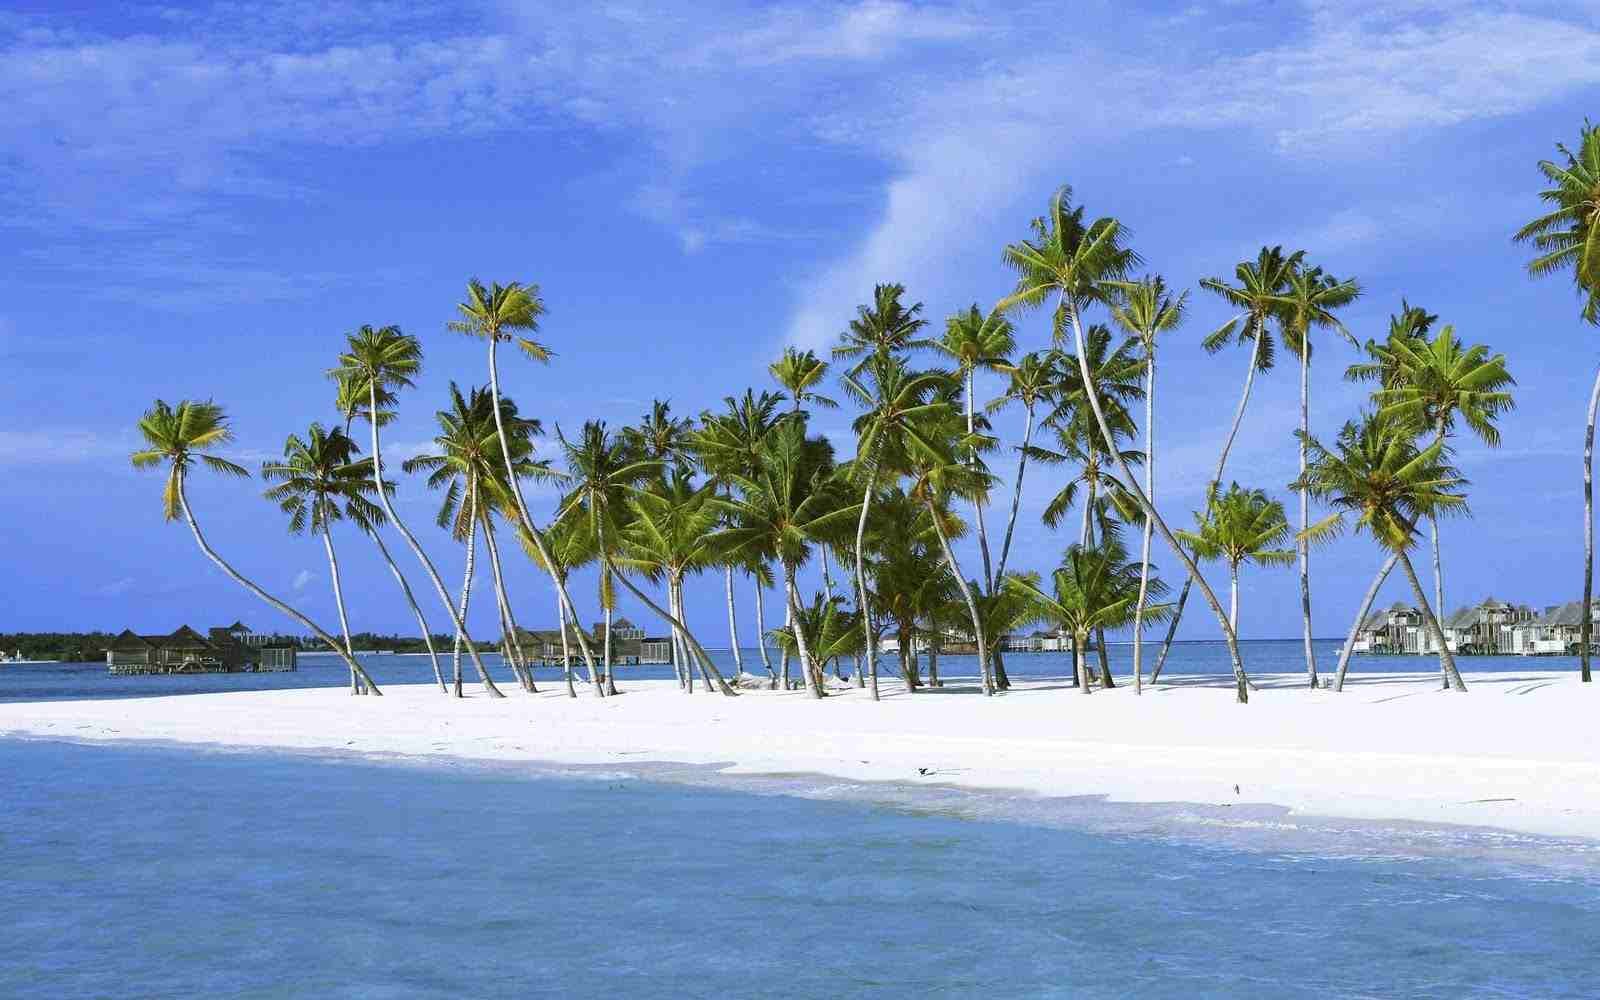 How To Get Travel Permit To Visit In Lakshadweep In Hindi